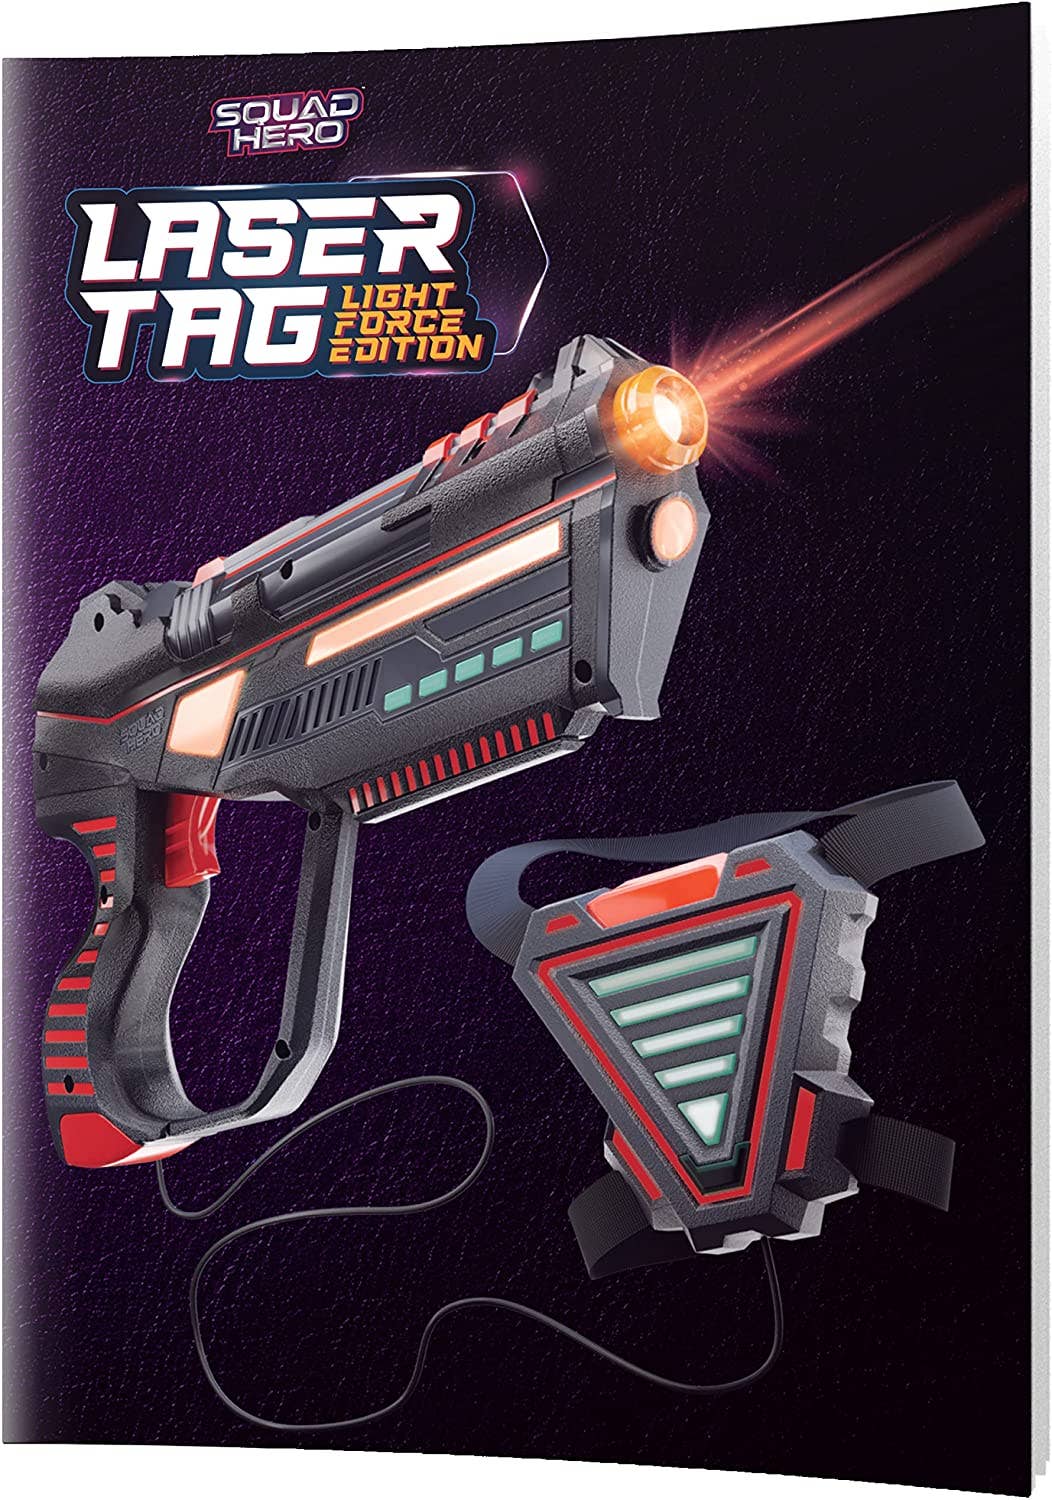 Rechargeable Laser Tag Set light Force Edition